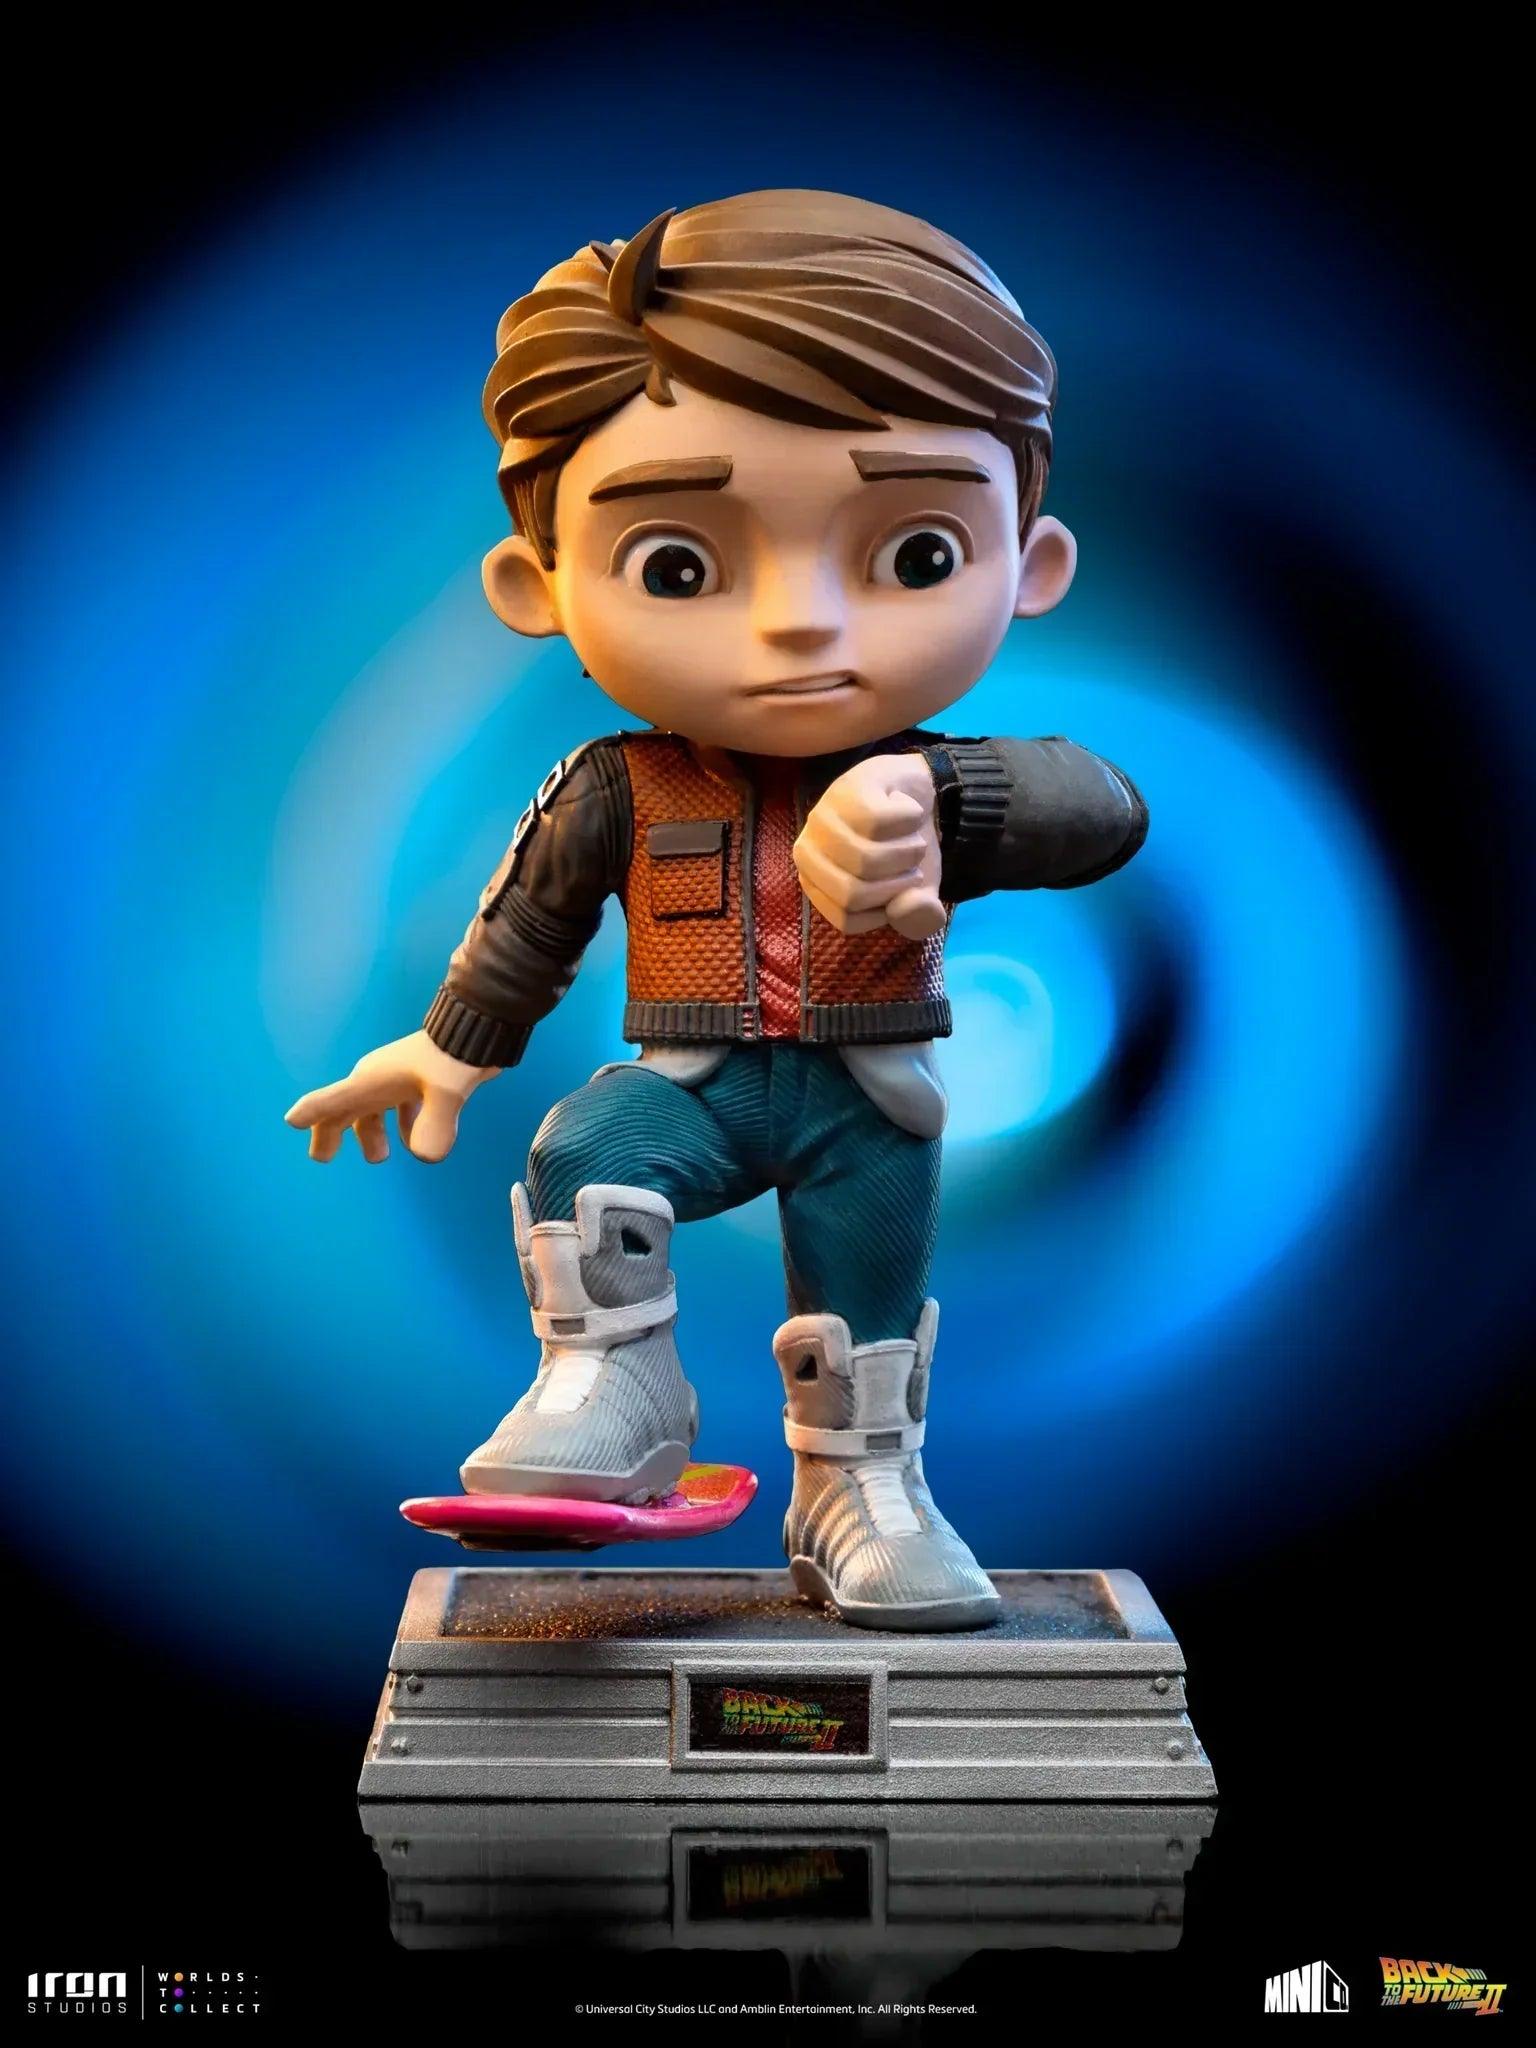 Iron Studios - Back to the Future - Marty McFly MiniCo Figure - The Card Vault